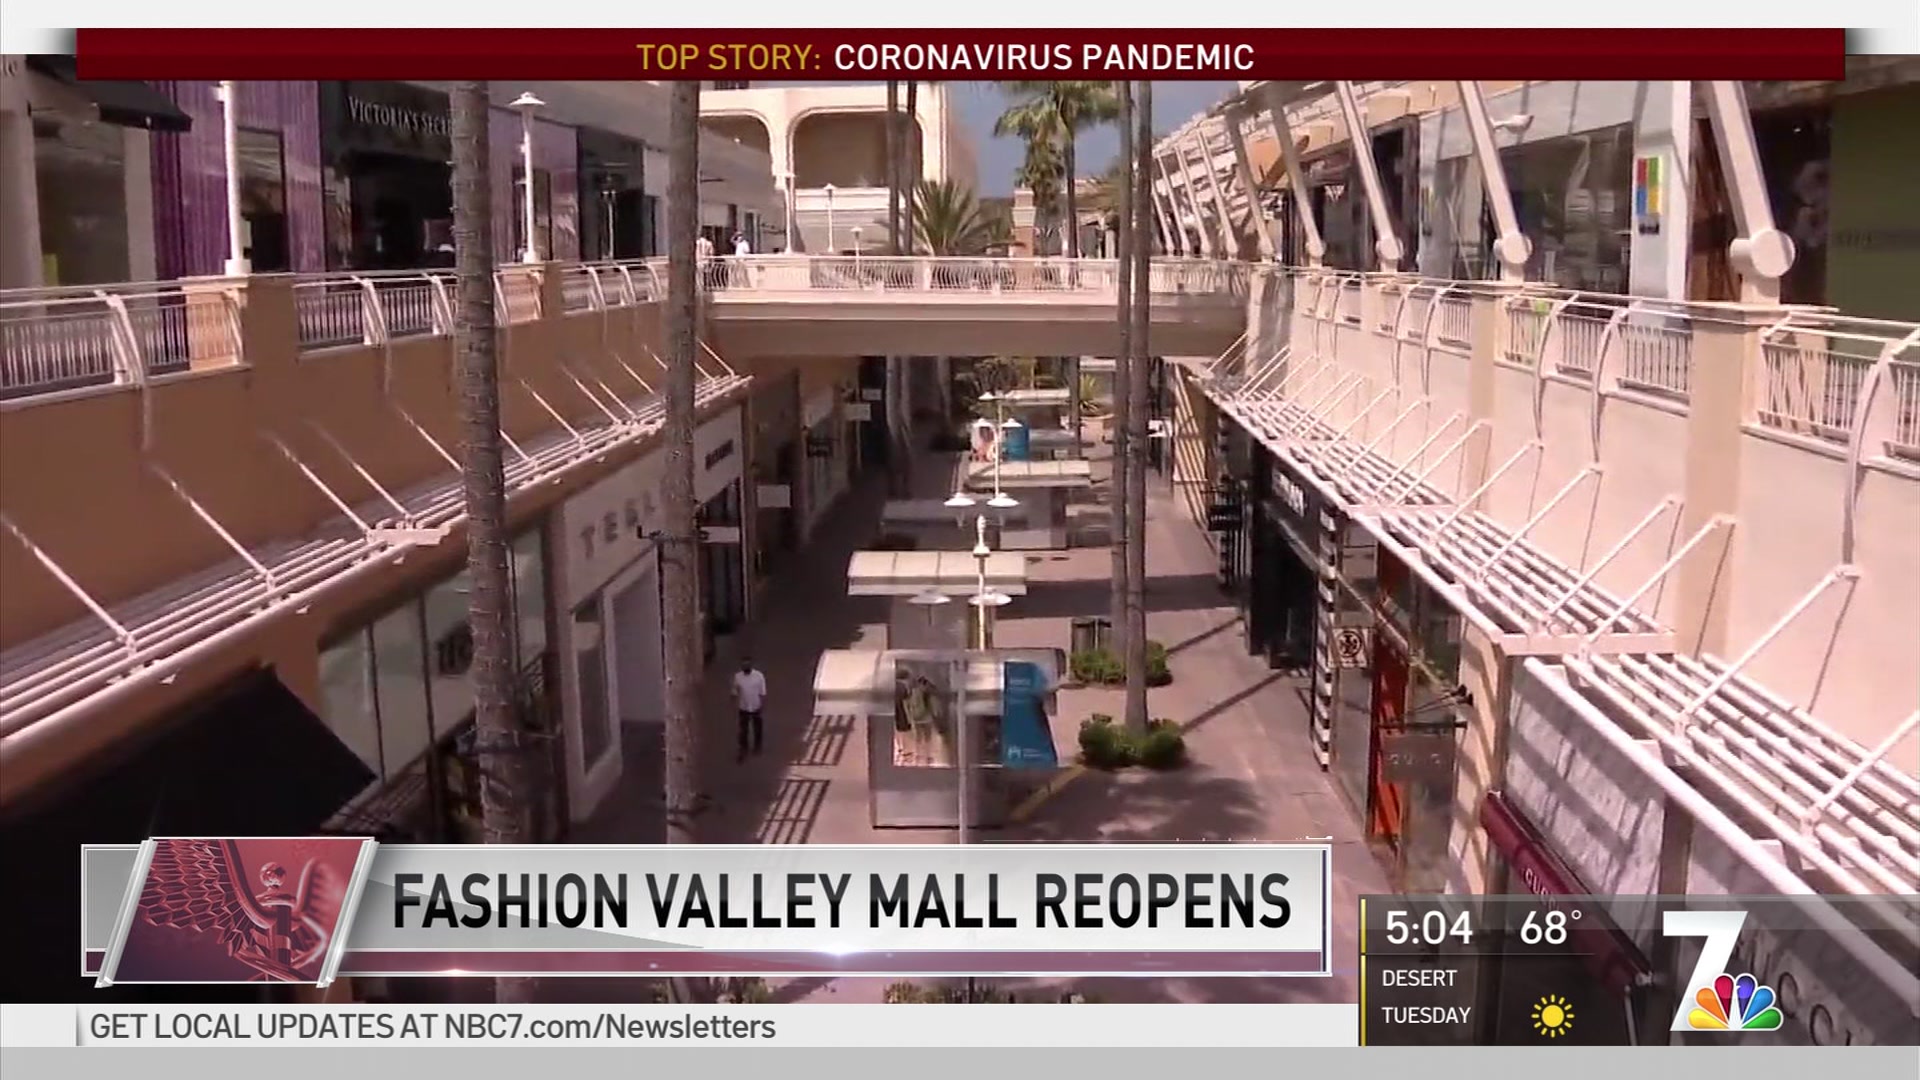 Catching up with last-minute shoppers at the Fashion Valley mall